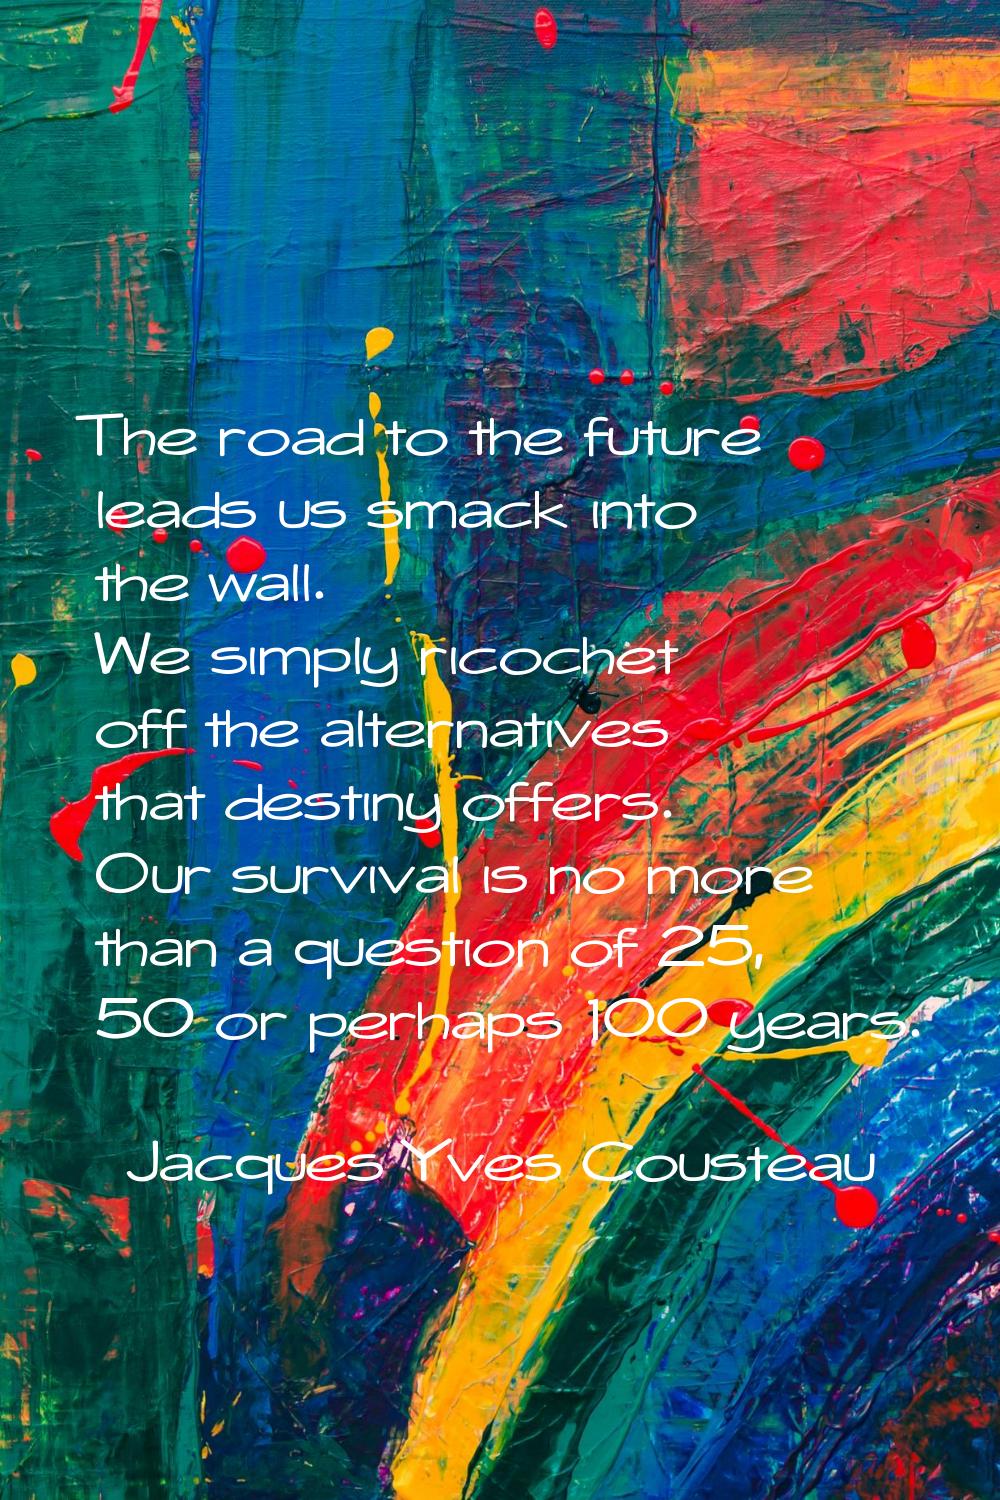 The road to the future leads us smack into the wall. We simply ricochet off the alternatives that d